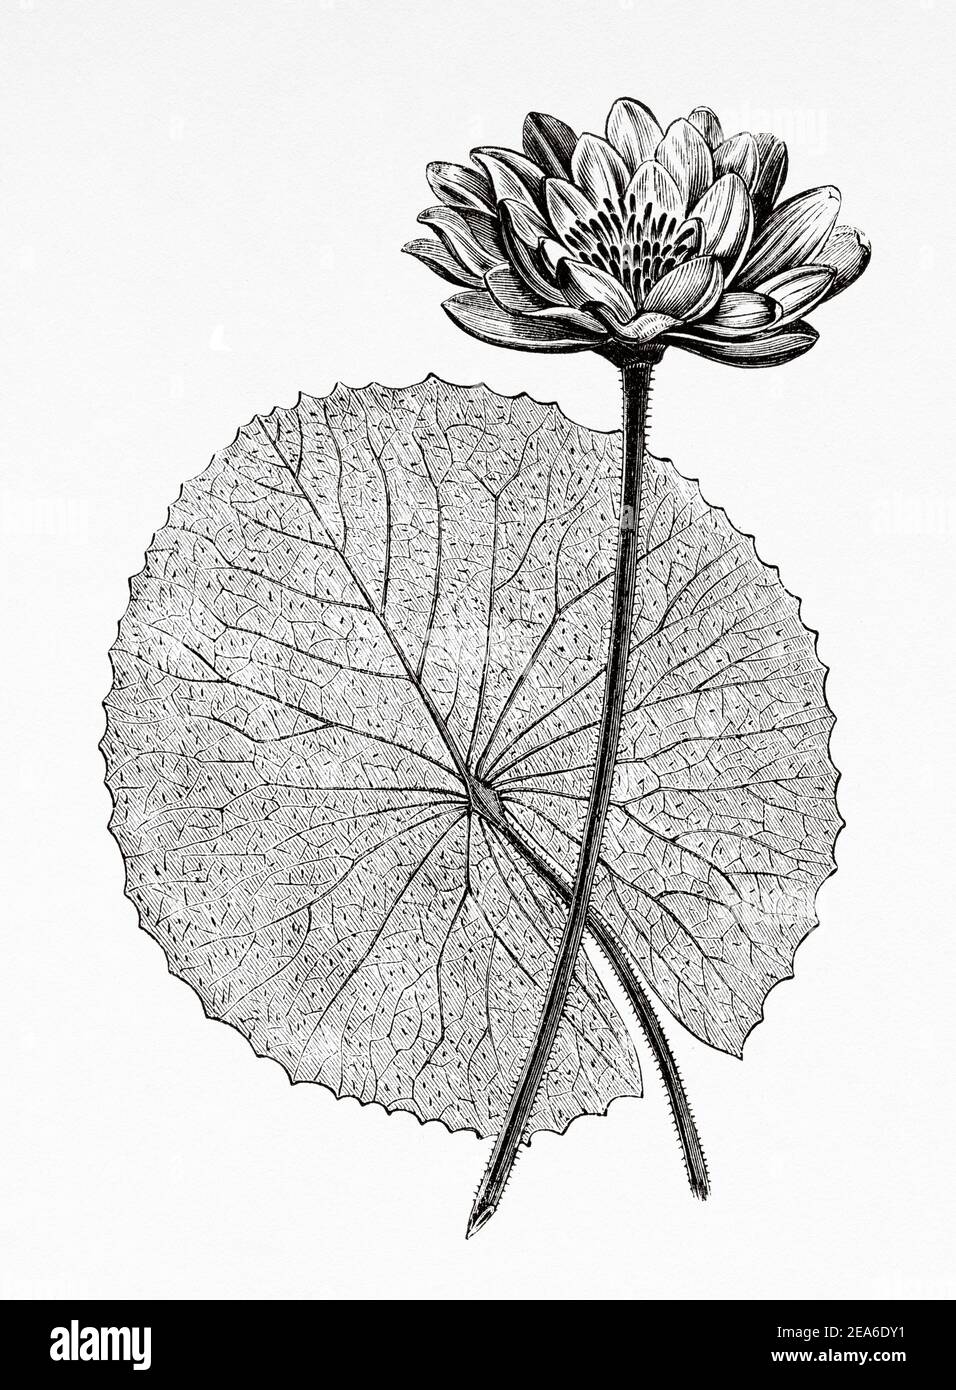 Lotus Flower. Nelumbo nucifera is called the sacred lotus or Indian lotus and the rose of the Nile. The longevity of its seeds is famous. Ancient Egypt History. Old 19th century engraved illustration from El Mundo Ilustrado 1879 Stock Photo